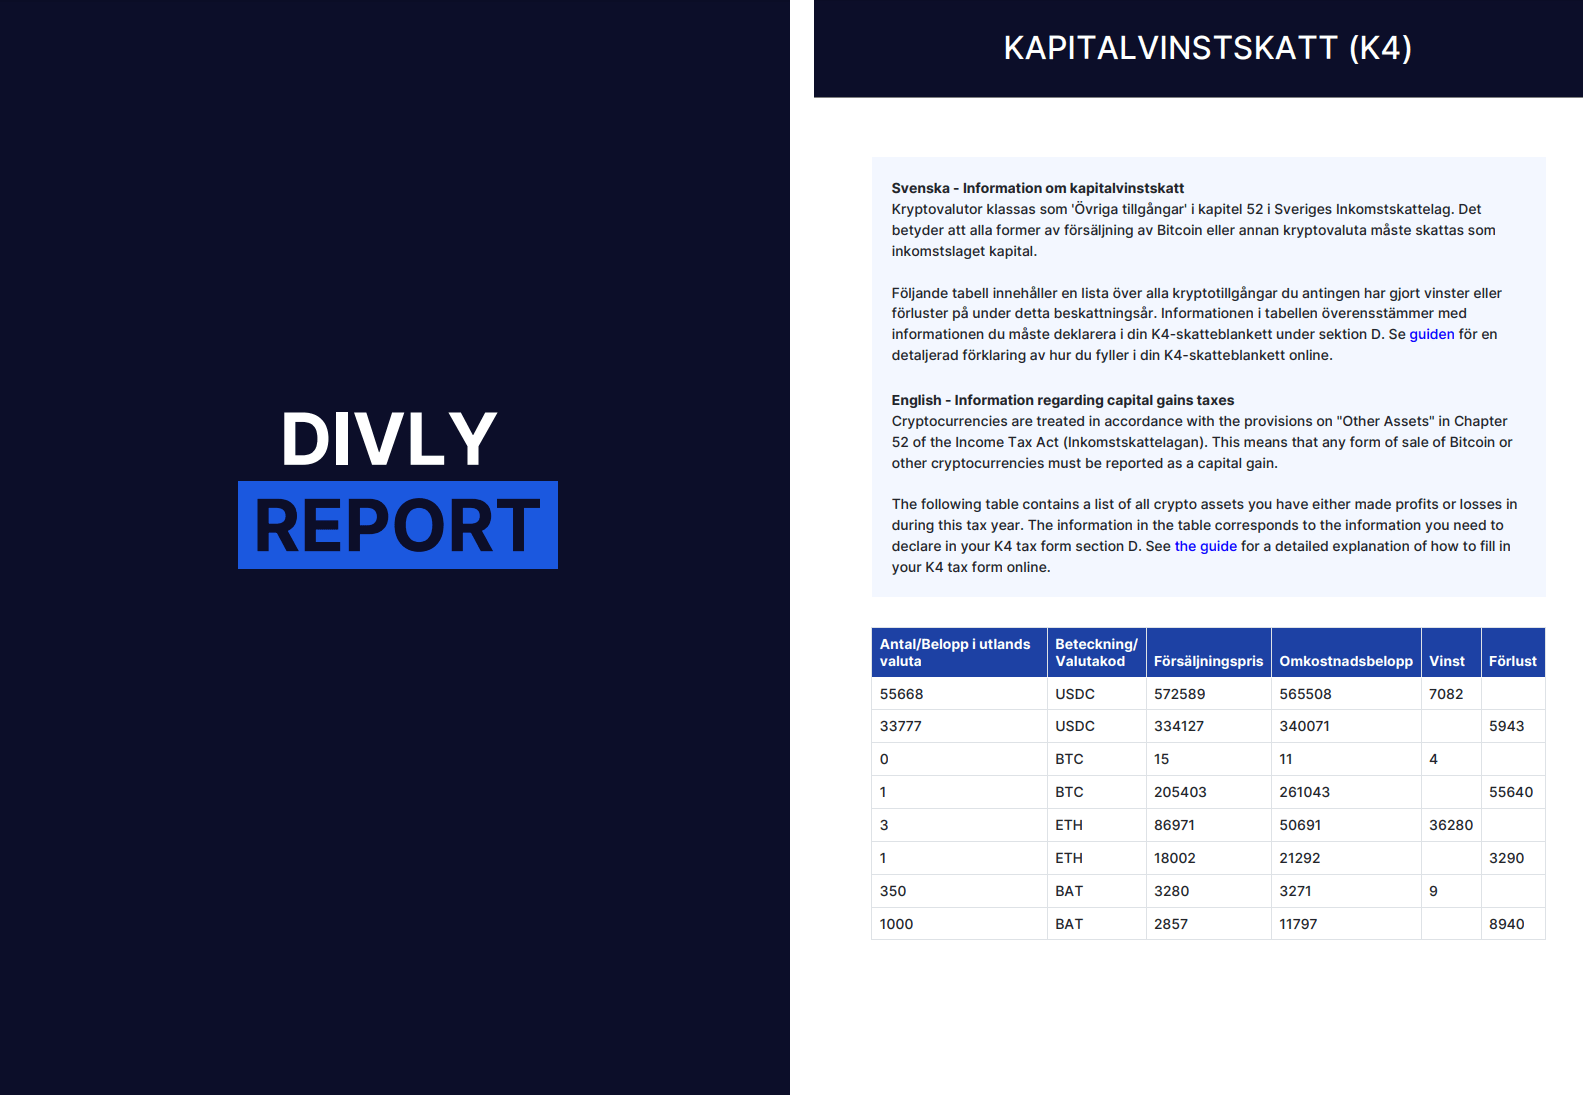 Divly tax report is tailored to meet Skatteverkets requirements